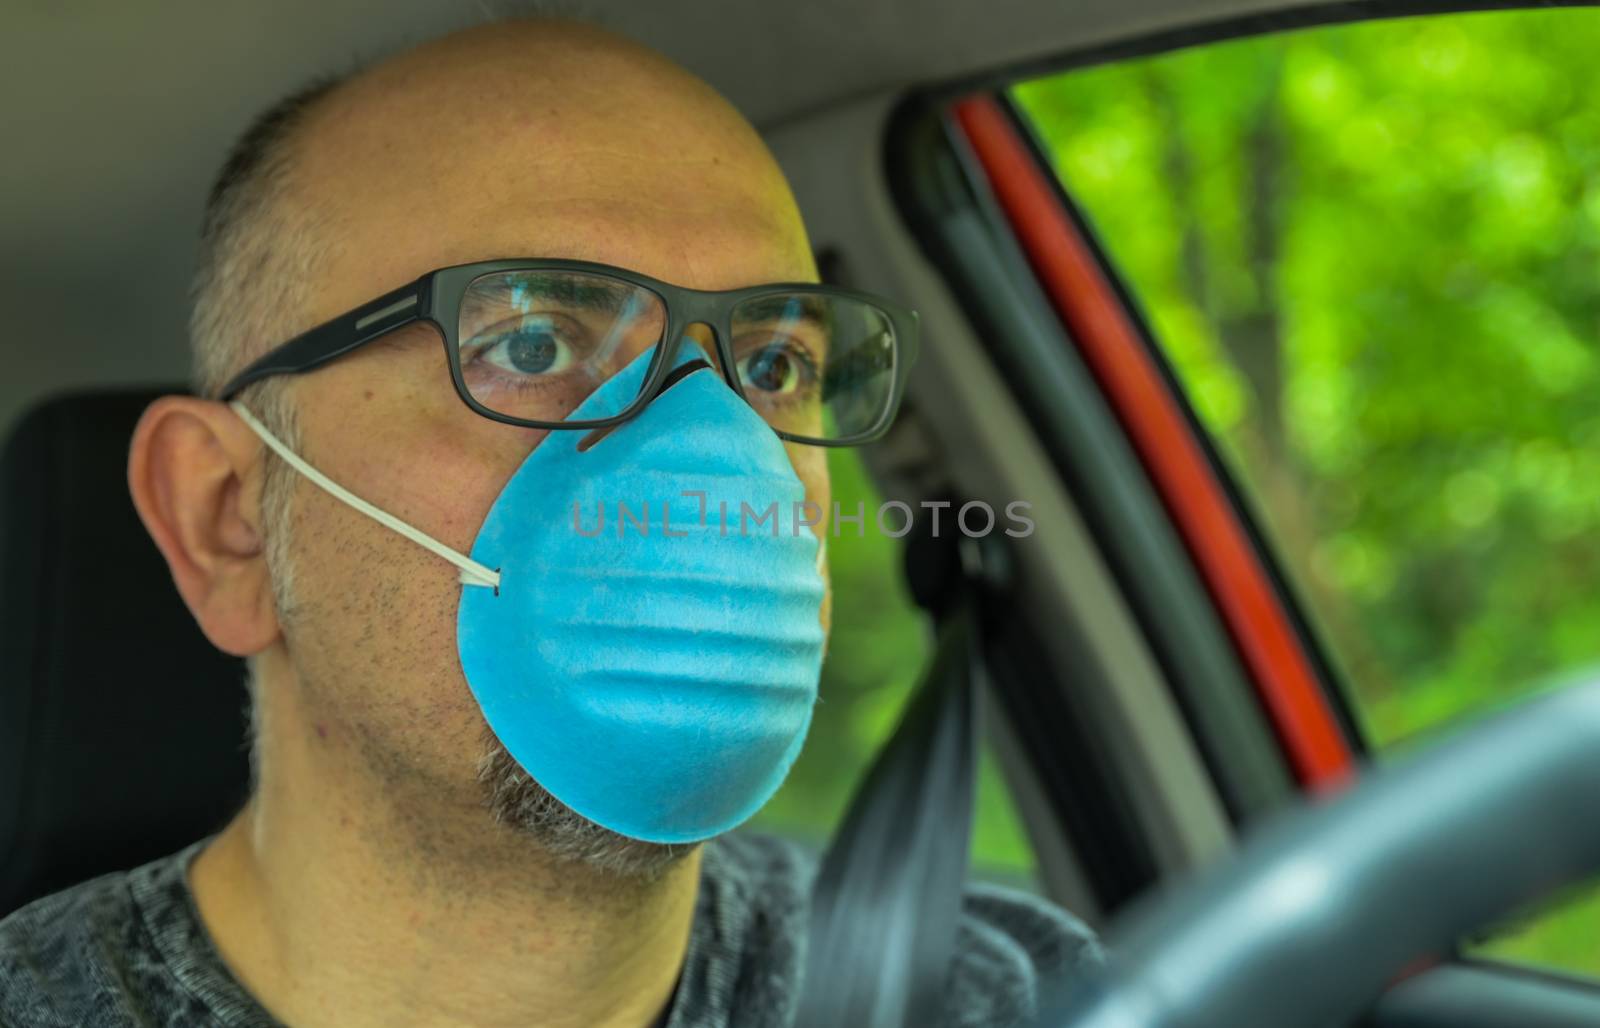 Turin, Piedmont, Italy. April 2020. Coronavirus pandemic: portrait of a Caucasian man driving the car wearing a blue mask to avoid contagion. Selective focus on man and blurred background.